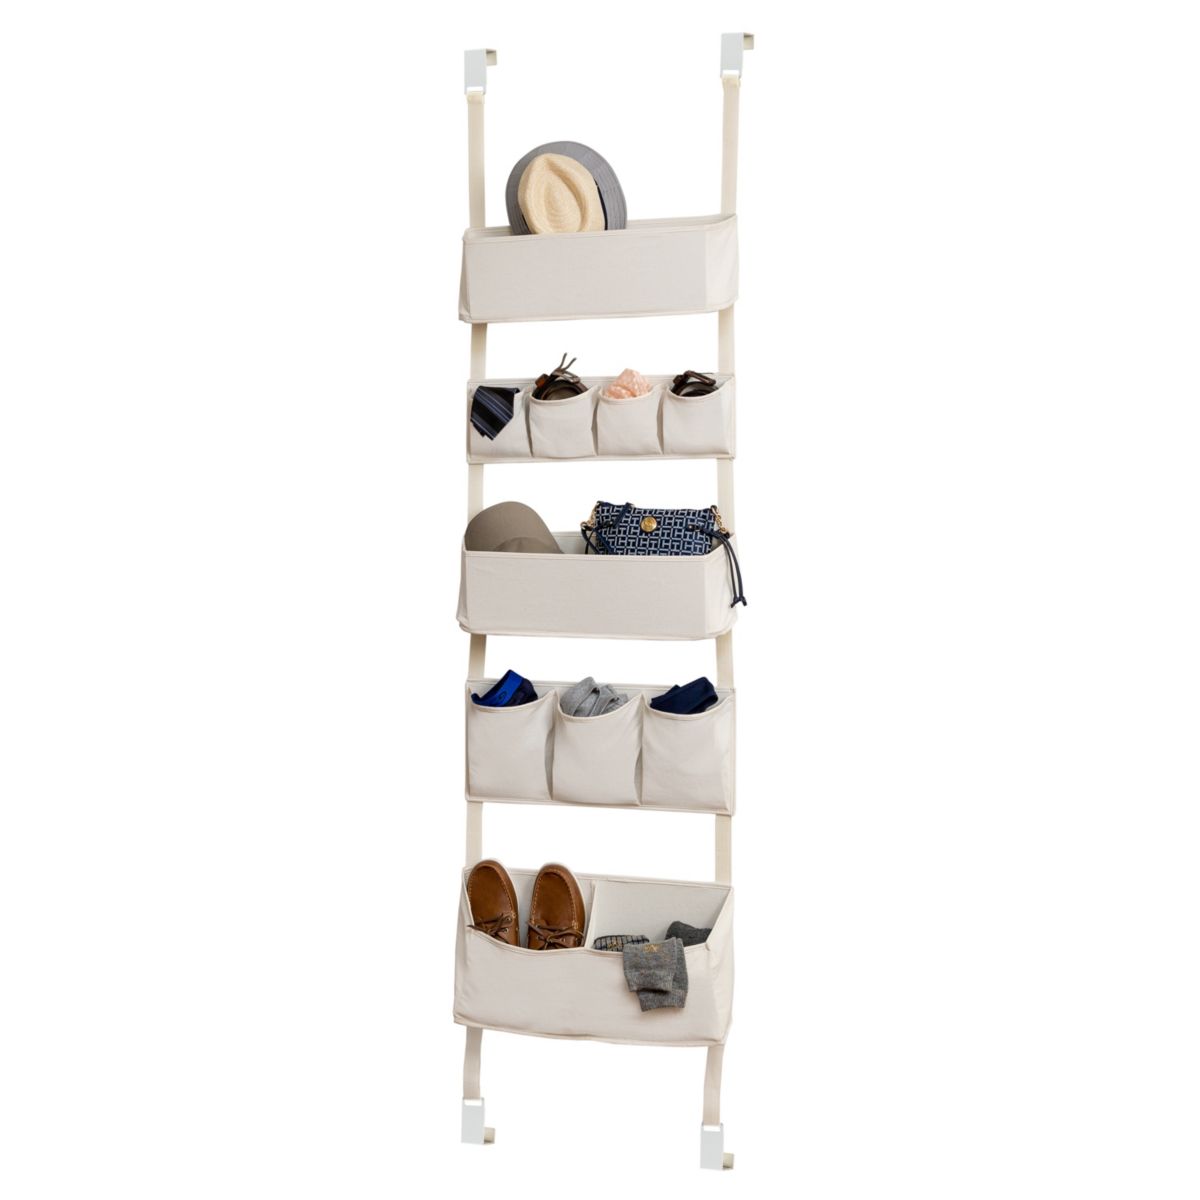 Honey-Can-Do 10-Pocket Over-The-Door Organizer (Natural) $16.20 at Macy's w/ Free S&H on $25+